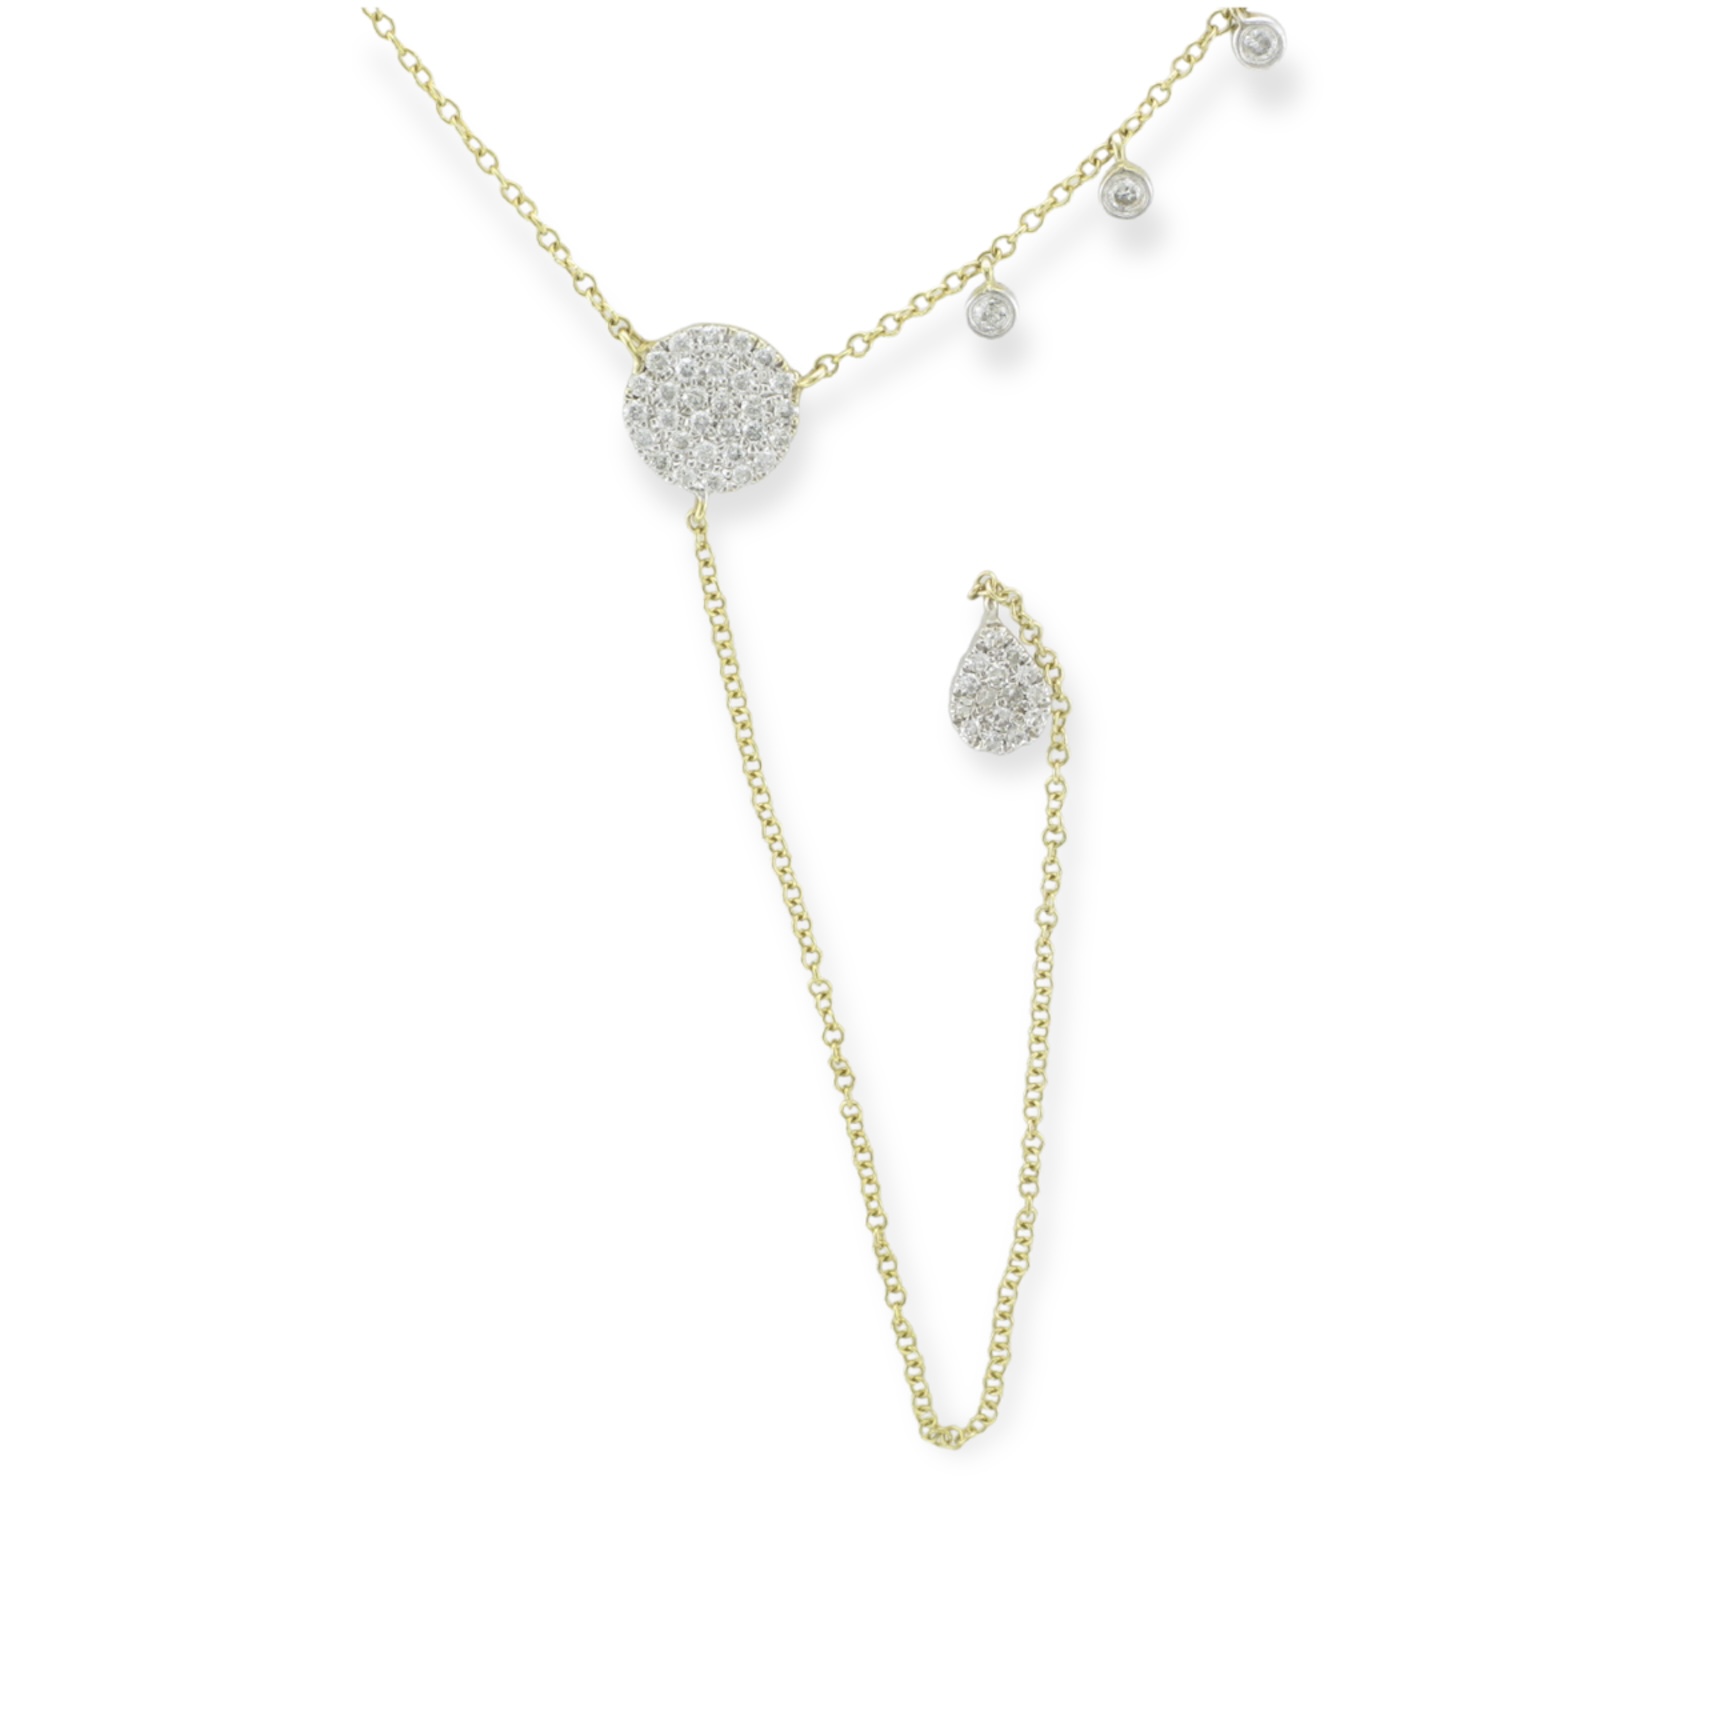 Dangling Pave Disk Necklace